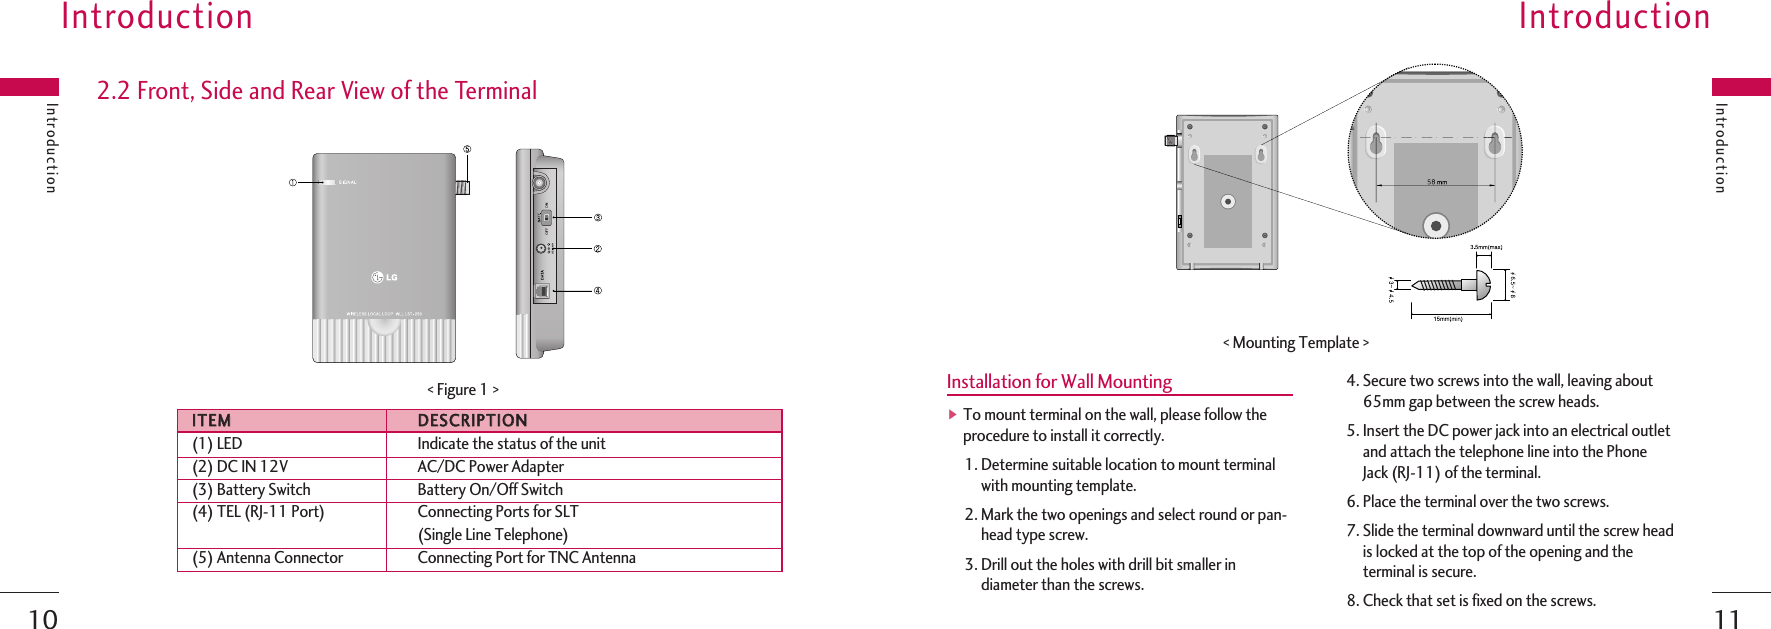 10IntroductionInstallation for Wall Mounting▶To mount terminal on the wall, please follow theprocedure to install it correctly.1. Determine suitable location to mount terminalwith mounting template.2. Mark the two openings and select round or pan-head type screw.3. Drill out the holes with drill bit smaller indiameter than the screws.4. Secure two screws into the wall, leaving about65mm gap between the screw heads.5. Insert the DC power jack into an electrical outletand attach the telephone line into the PhoneJack (RJ-11) of the terminal.6. Place the terminal over the two screws.7. Slide the terminal downward until the screw headis locked at the top of the opening and theterminal is secure.8. Check that set is fixed on the screws.11IntroductionIntroductionIntroduction2.2 Front, Side and Rear View of the Terminal&lt; Figure 1 &gt;&lt; Mounting Template &gt;IITTEEMMDDEESSCCRRIIPPTTIIOONN(1) LED Indicate the status of the unit(2) DC IN 12V AC/DC Power Adapter(3) Battery Switch Battery On/Off Switch(4) TEL (RJ-11 Port) Connecting Ports for SLT(Single Line Telephone)(5) Antenna Connector Connecting Port for TNC Antenna